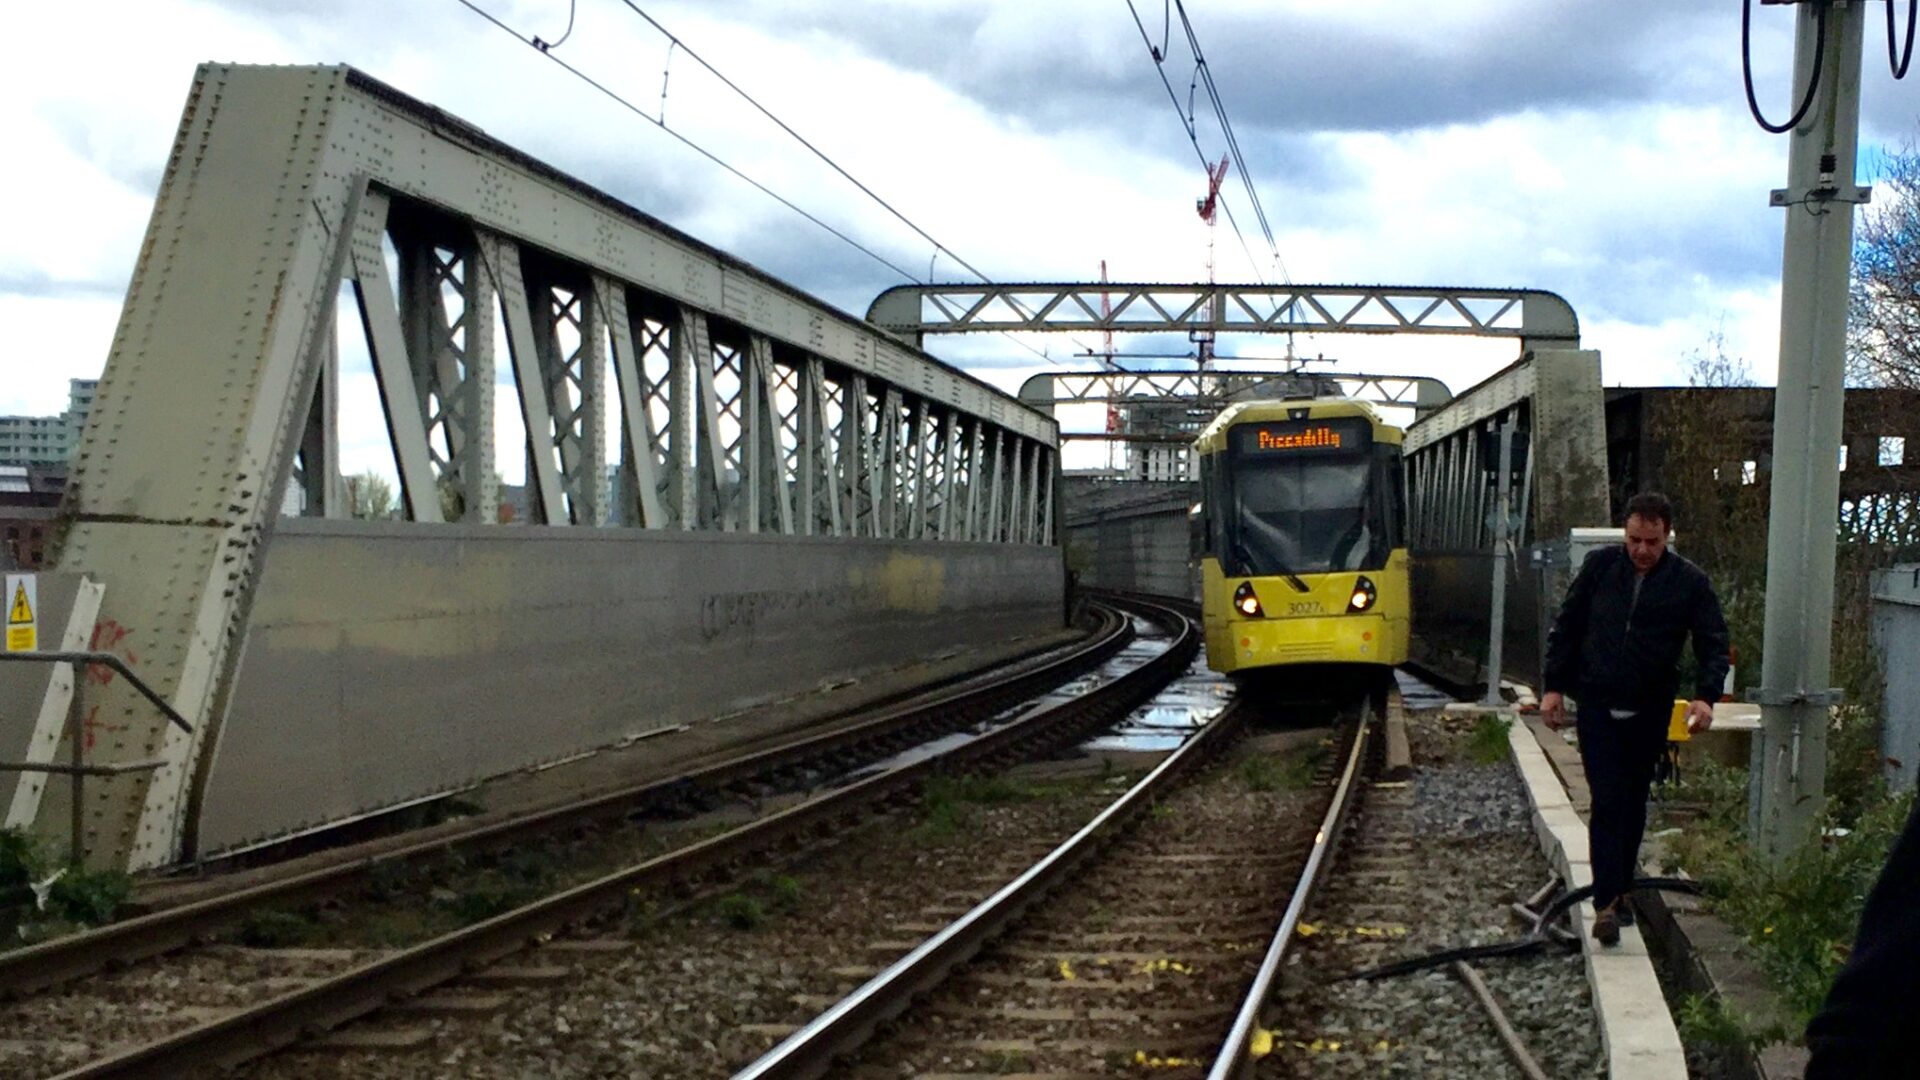 A Metrolink tram on Deansgate Viaduct - crisis communications in inaction